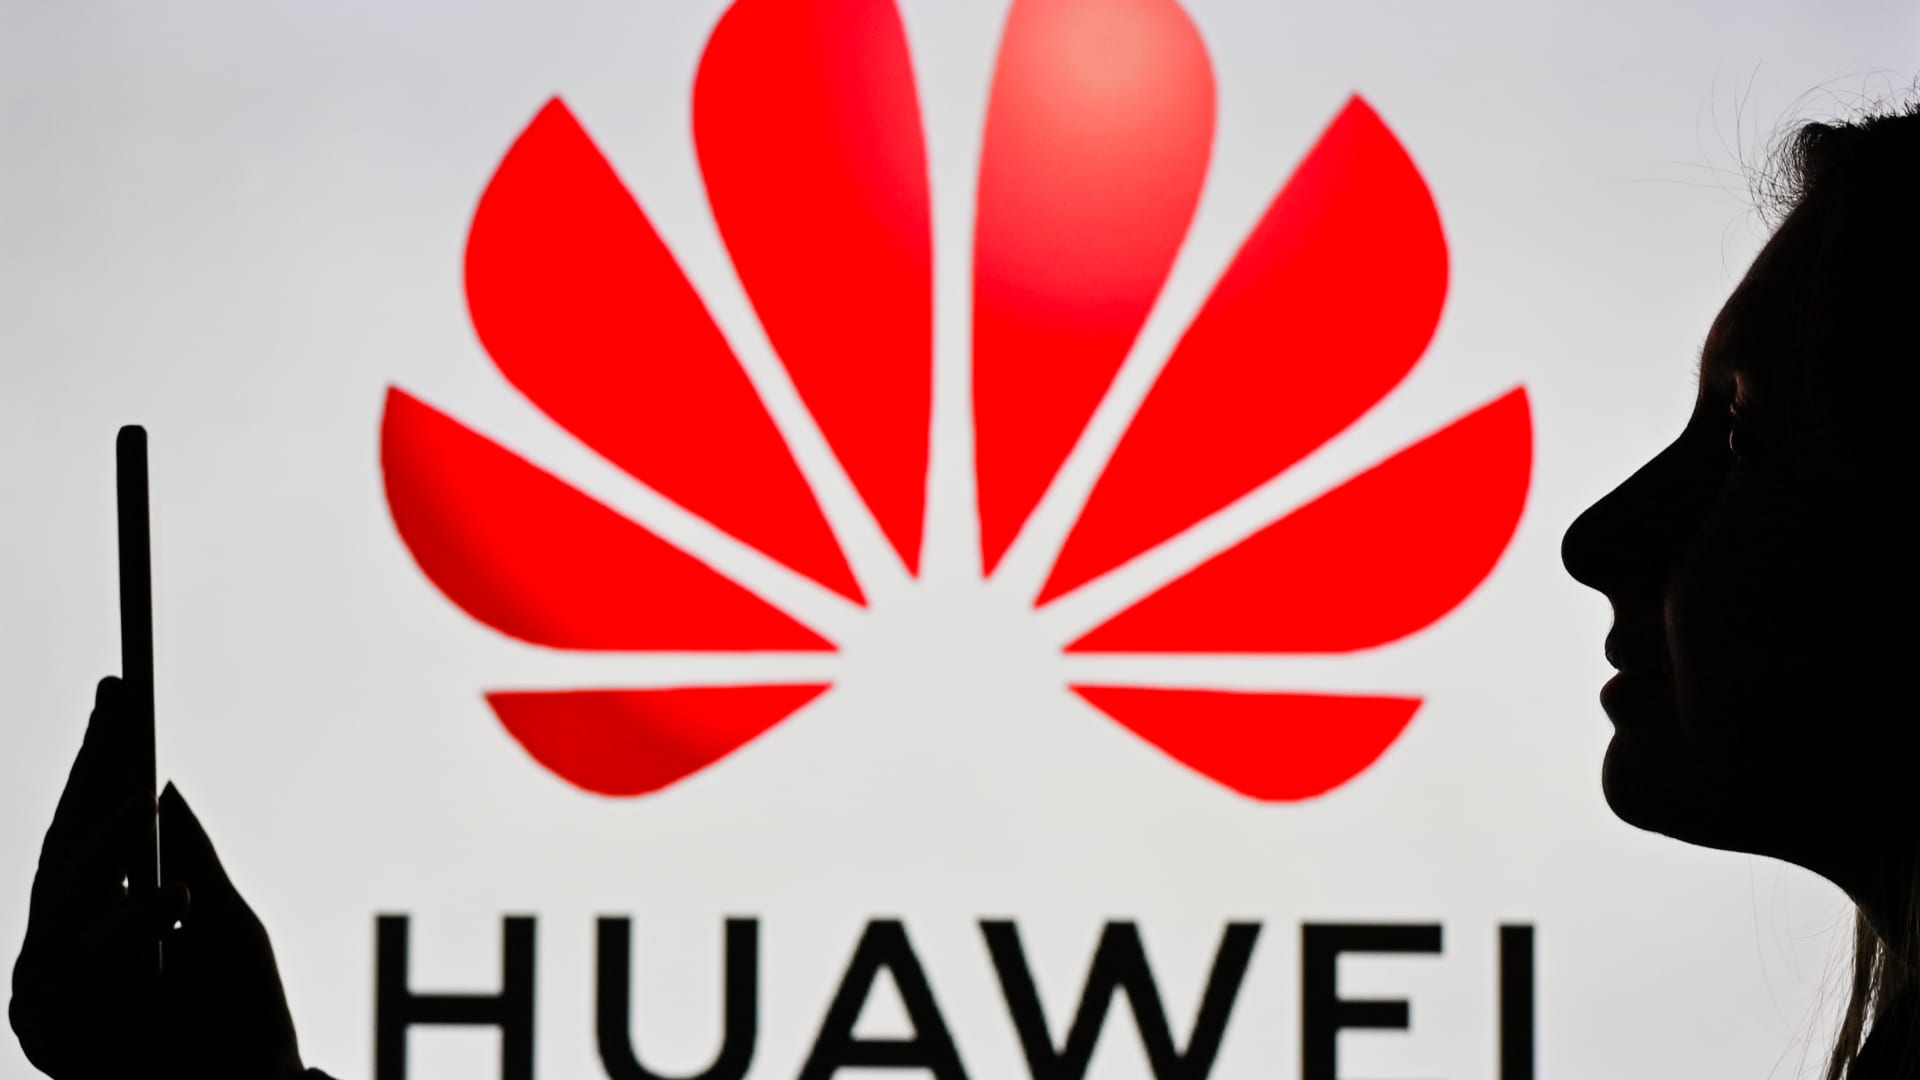 Huawei has reportedly developed domestic chip design tools despite US sanctions